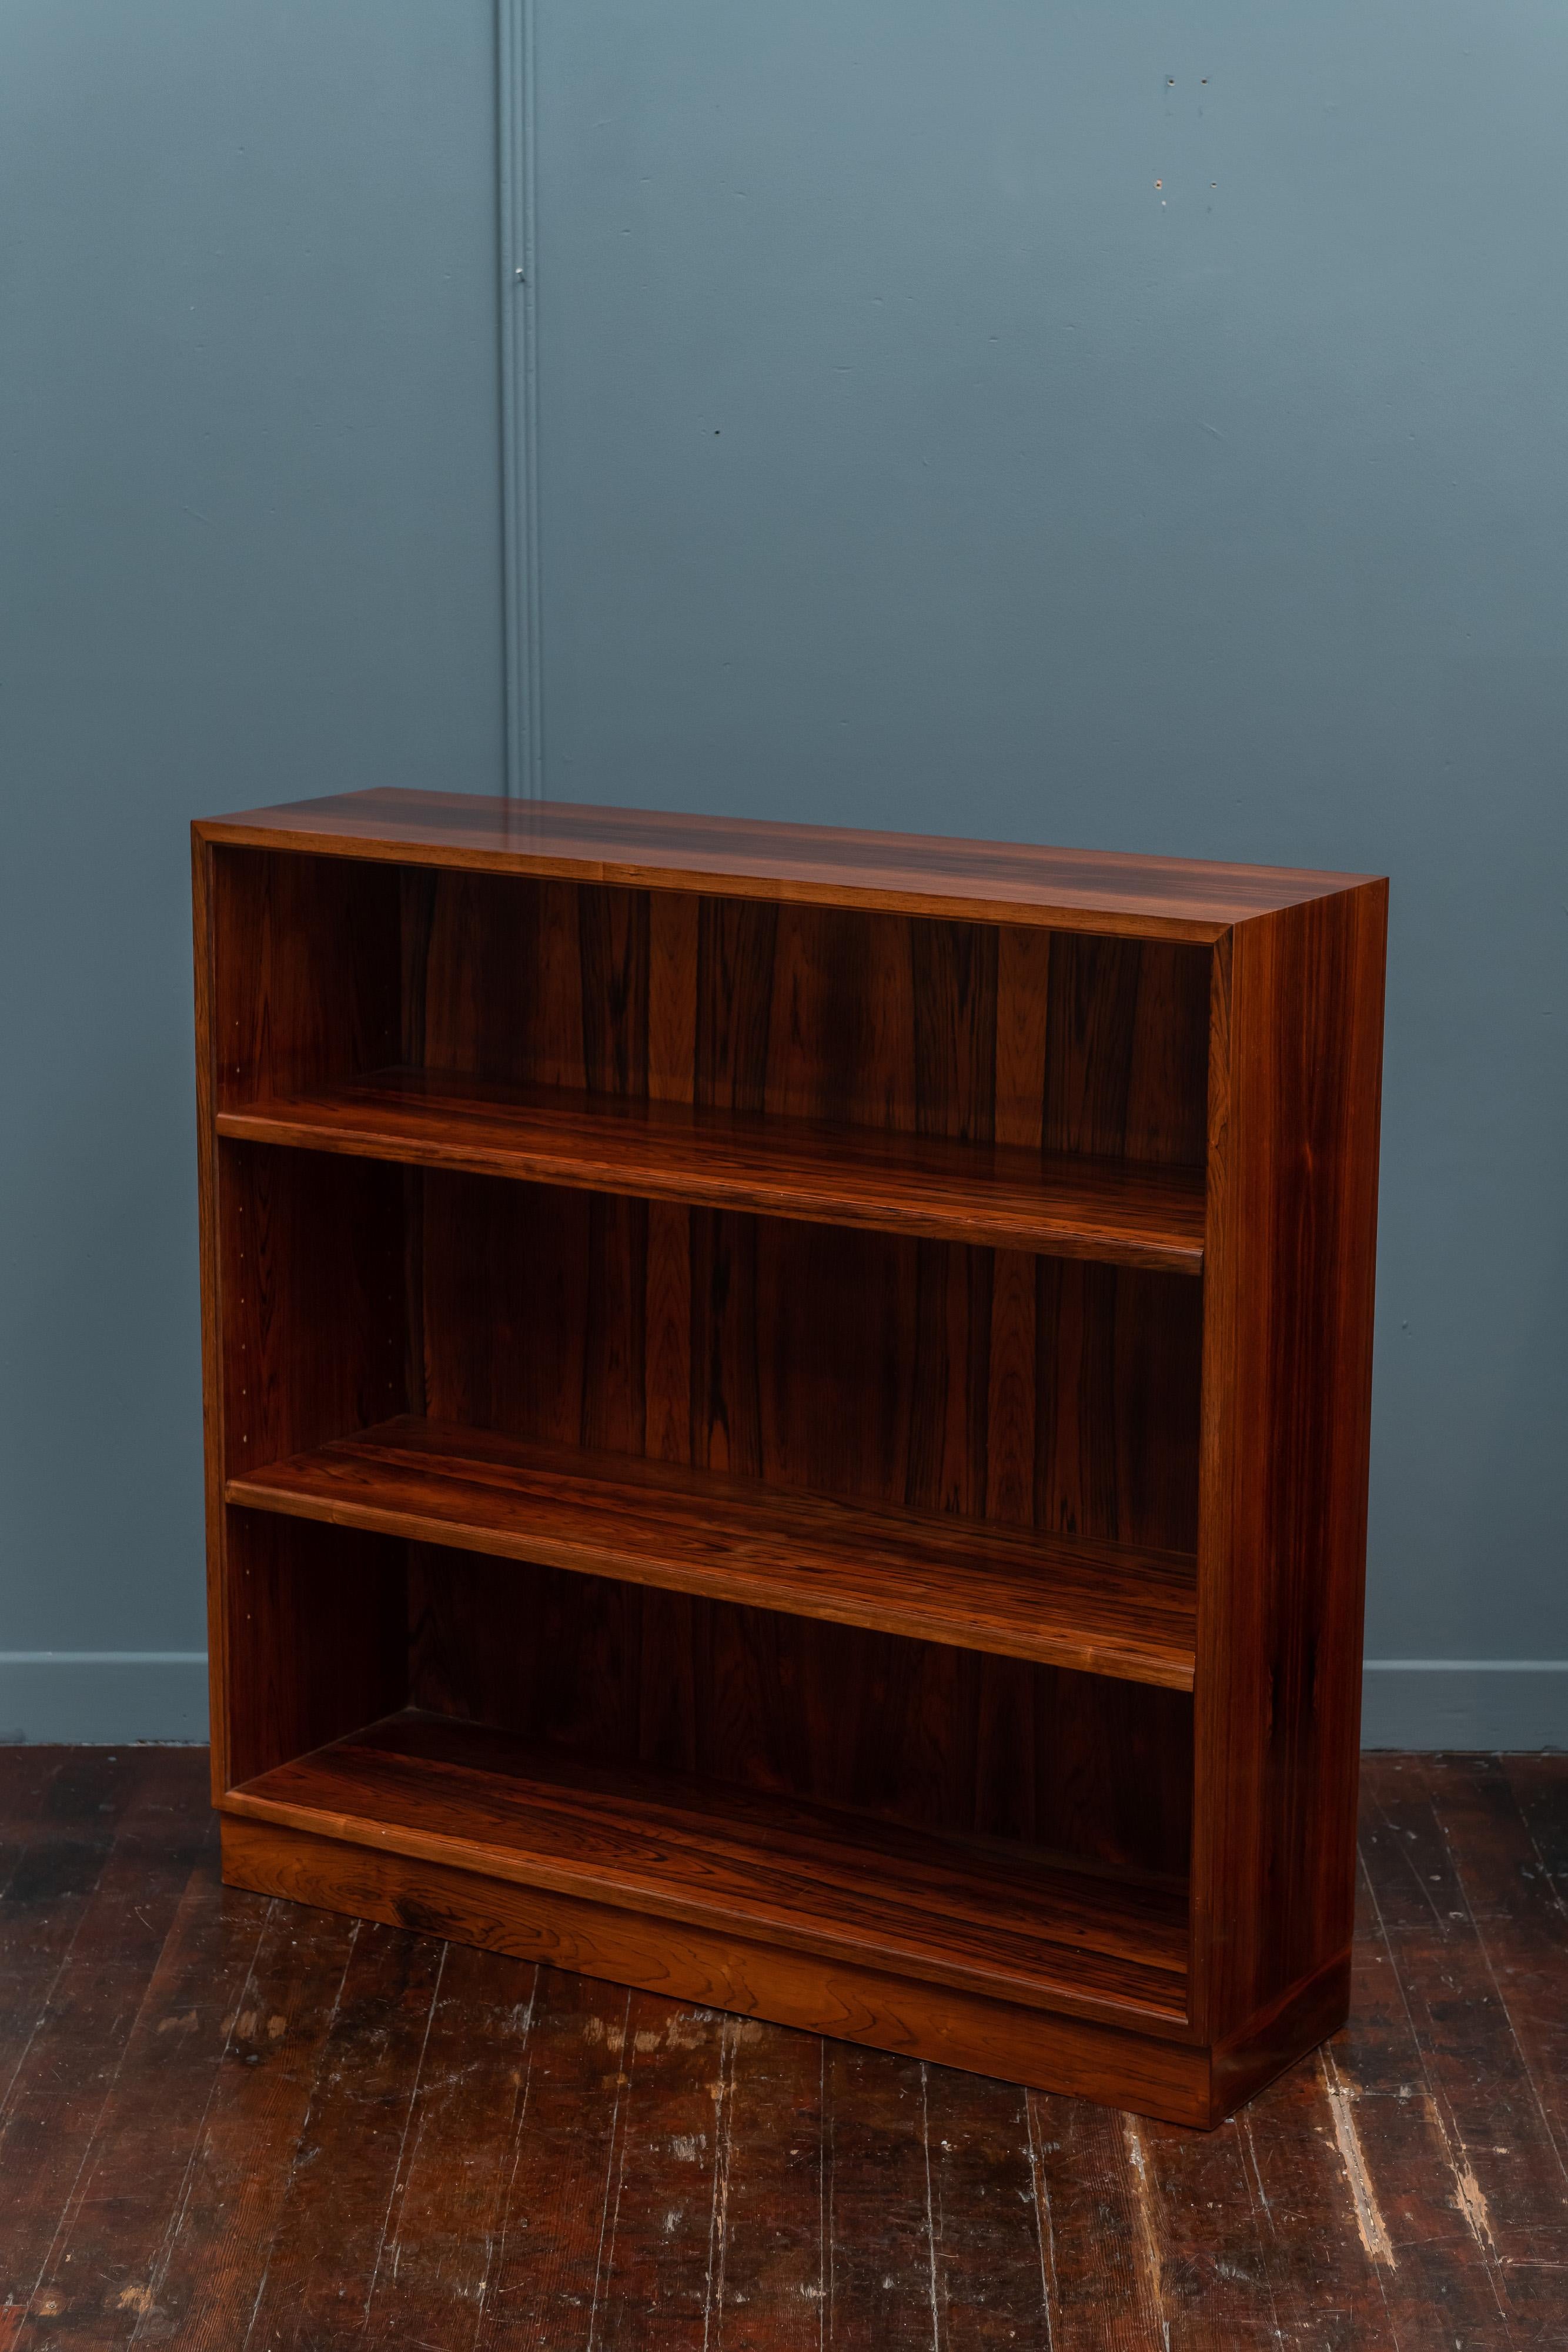 Mid-20th Century Scandinavian Modern Rosewood Bookcase by Willy Beck